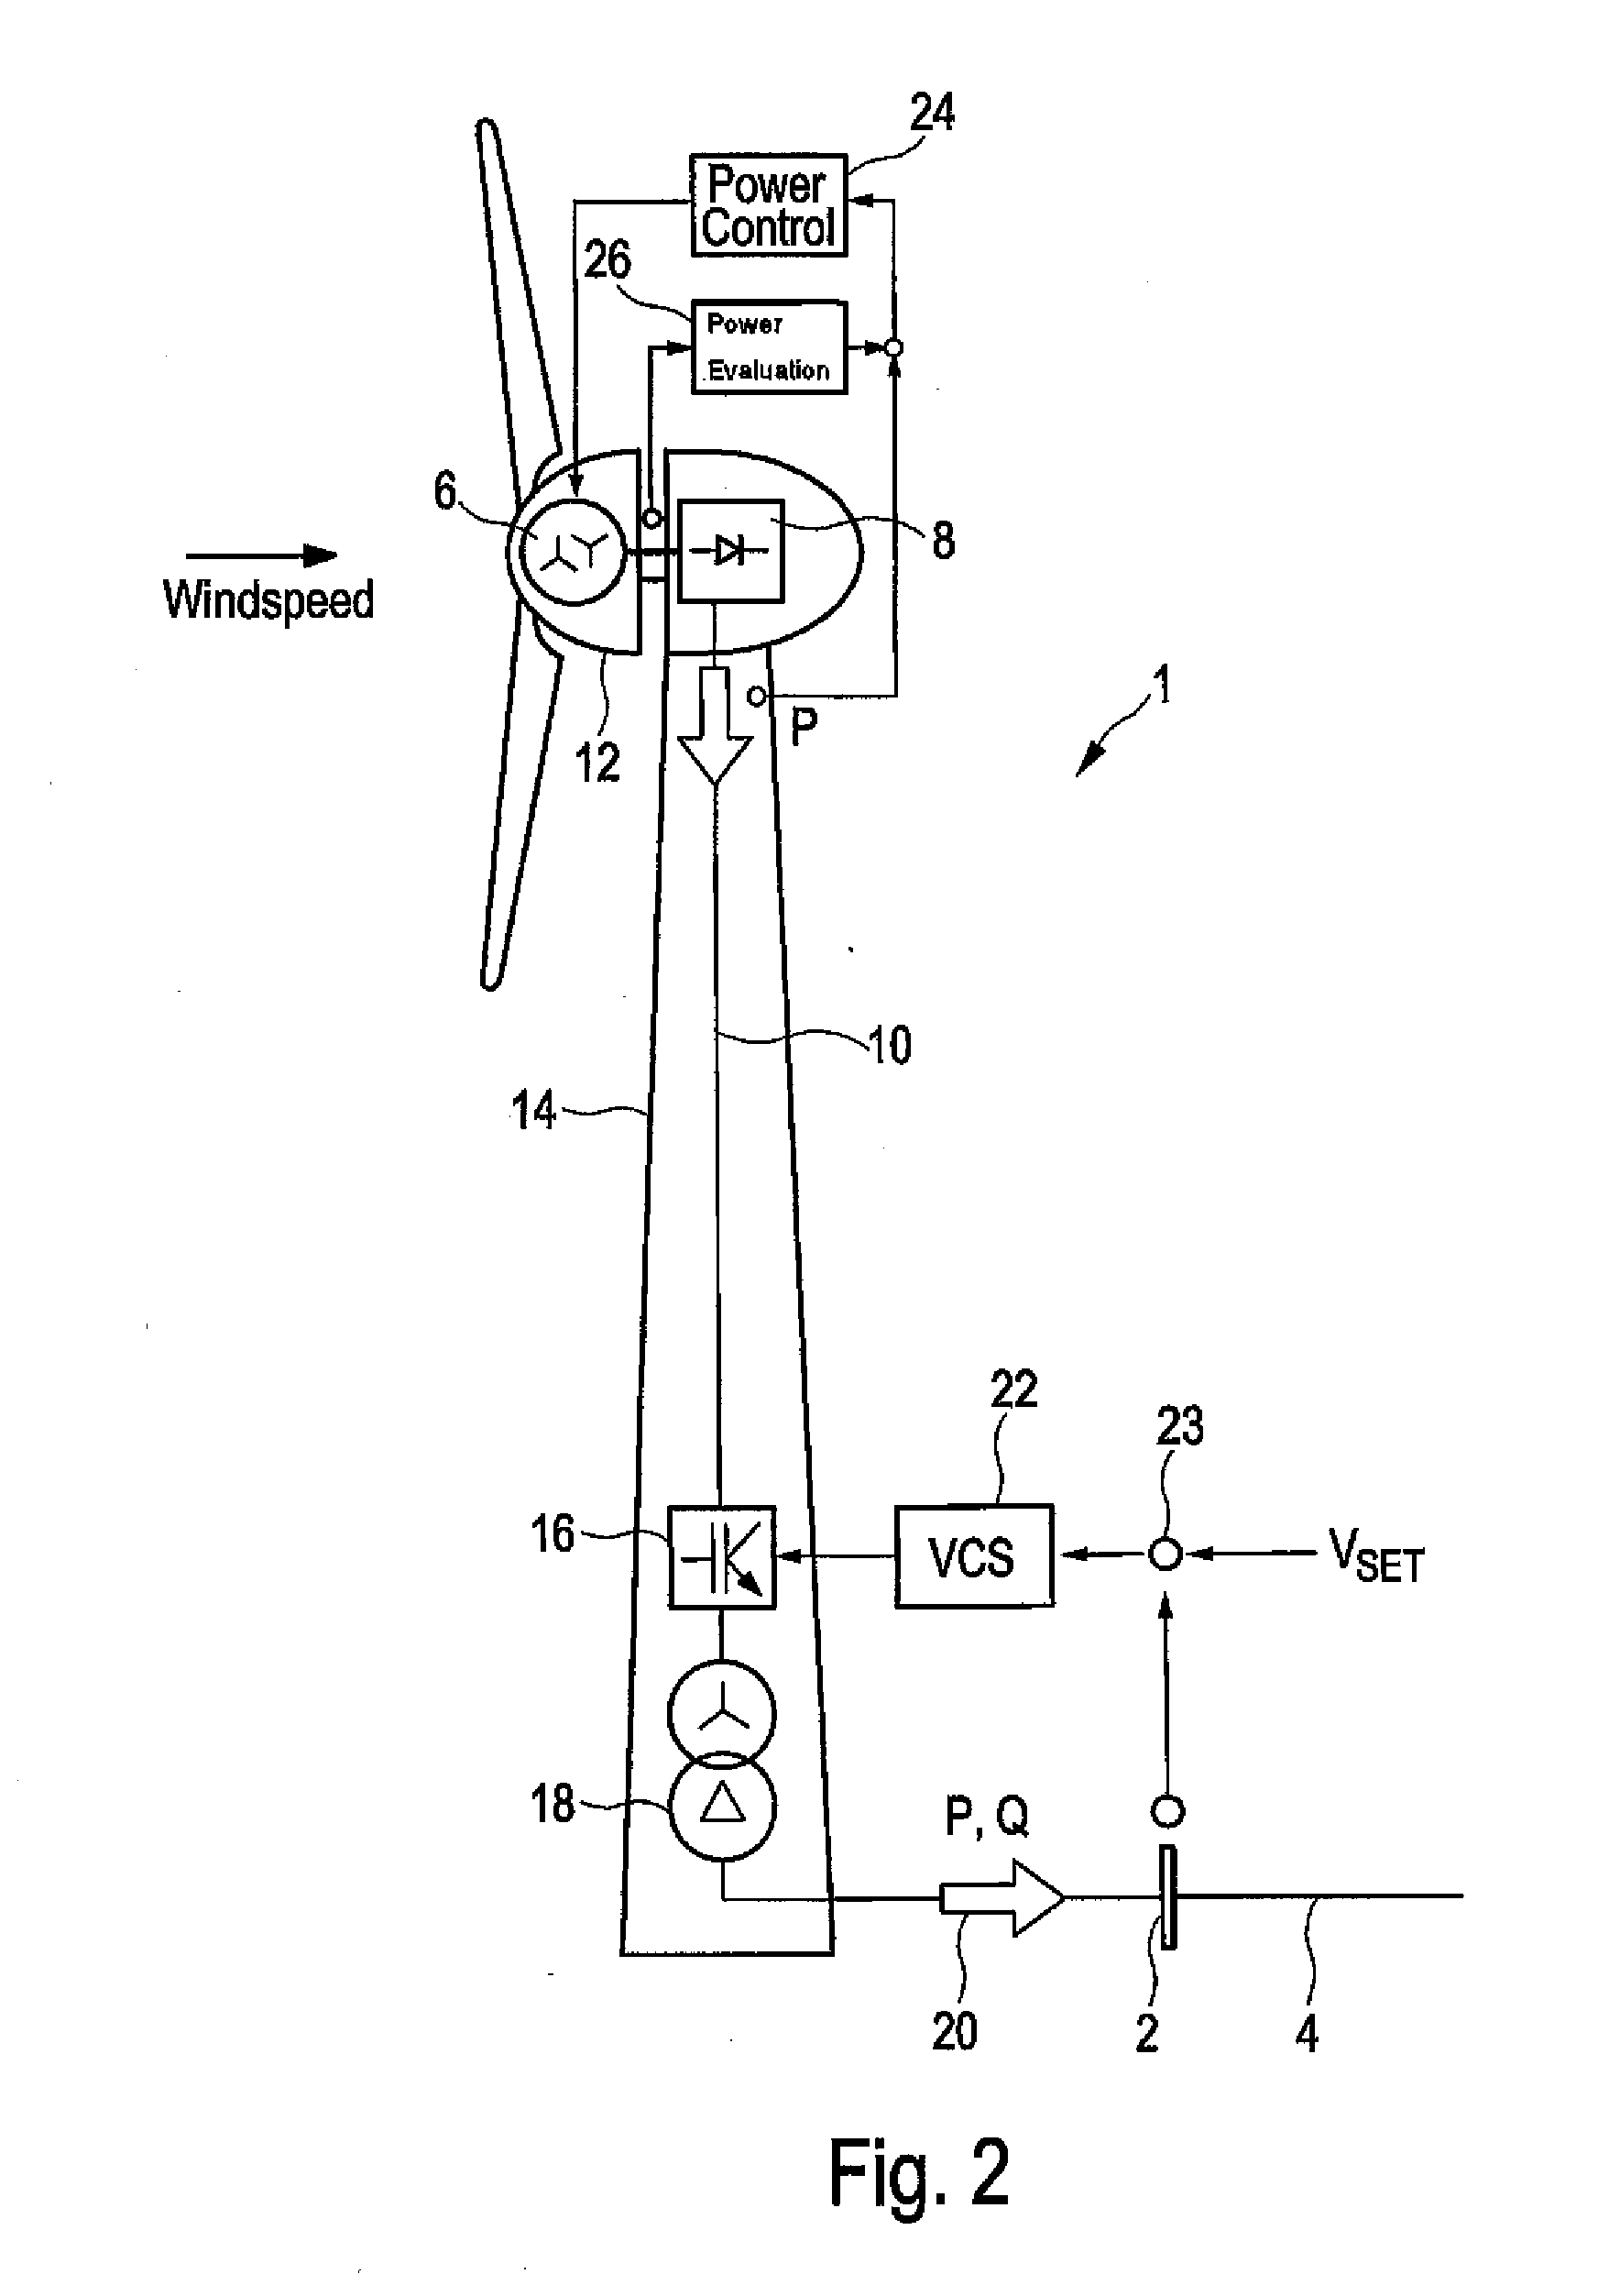 Method for controlling a wind park